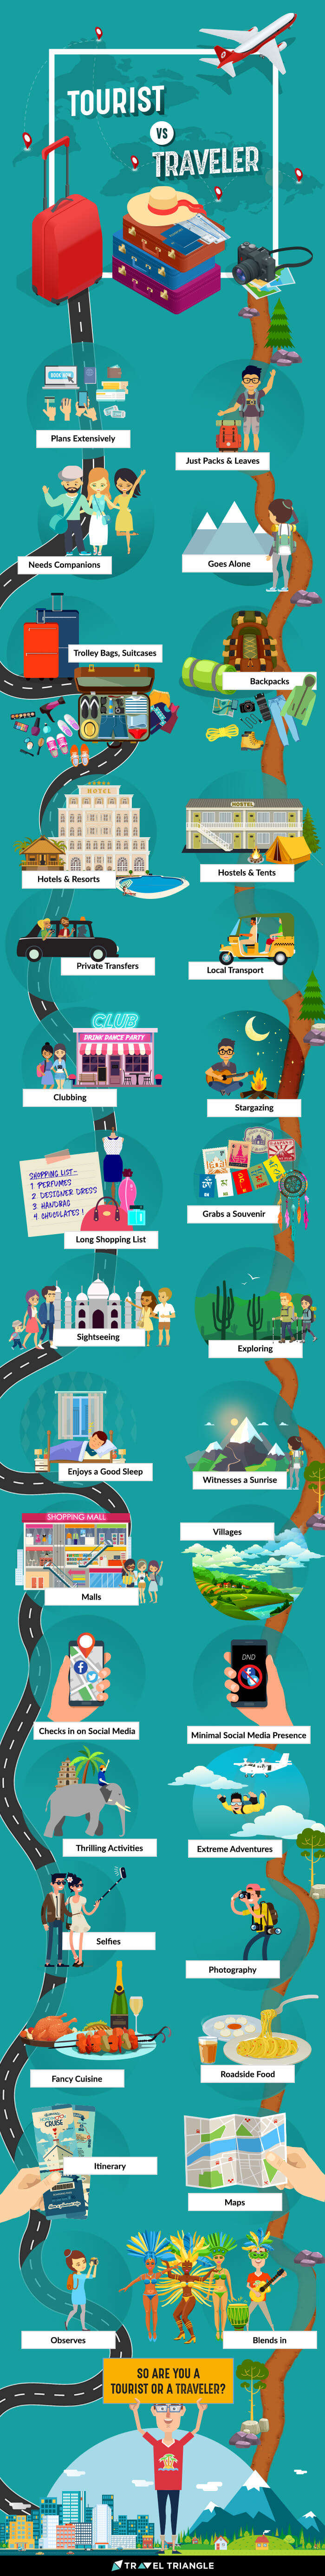 tourist vs traveler infographic: which one defines your personality?